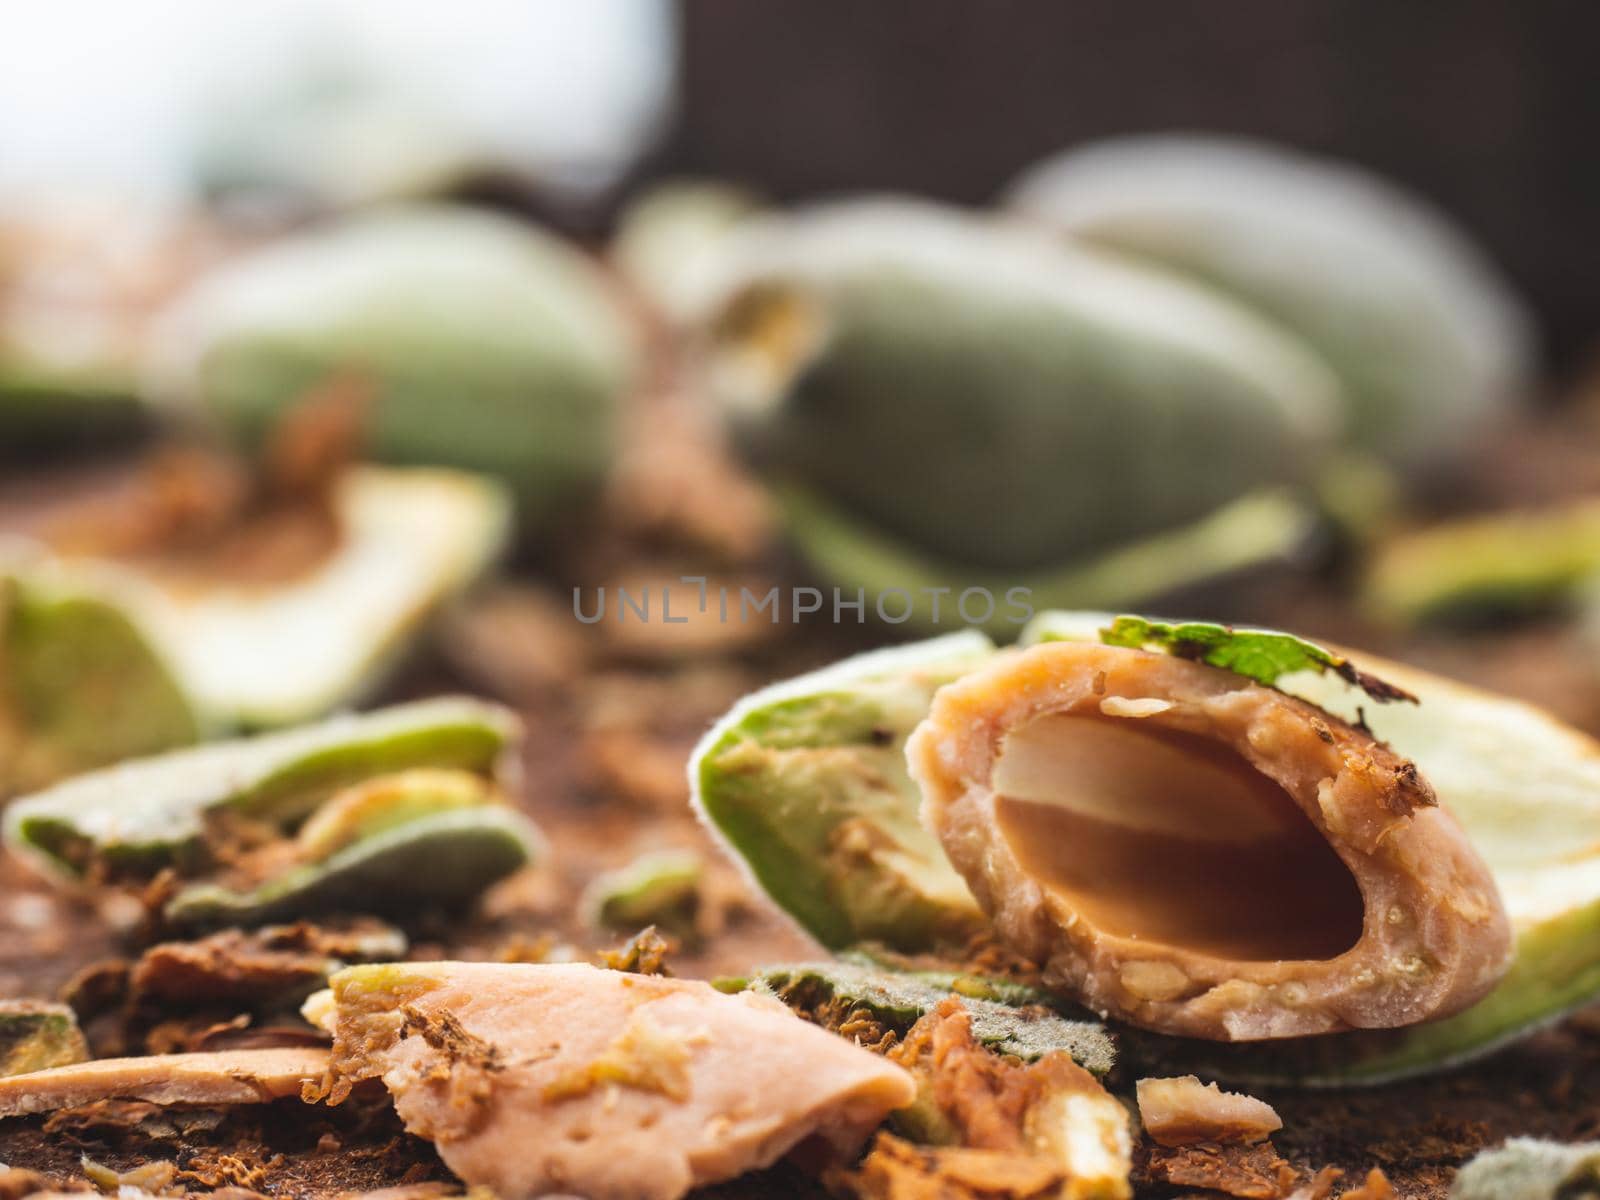 Cracked almond  nuts, shells and peeling fresh almonds from green husks. Testing fresh almonds taste